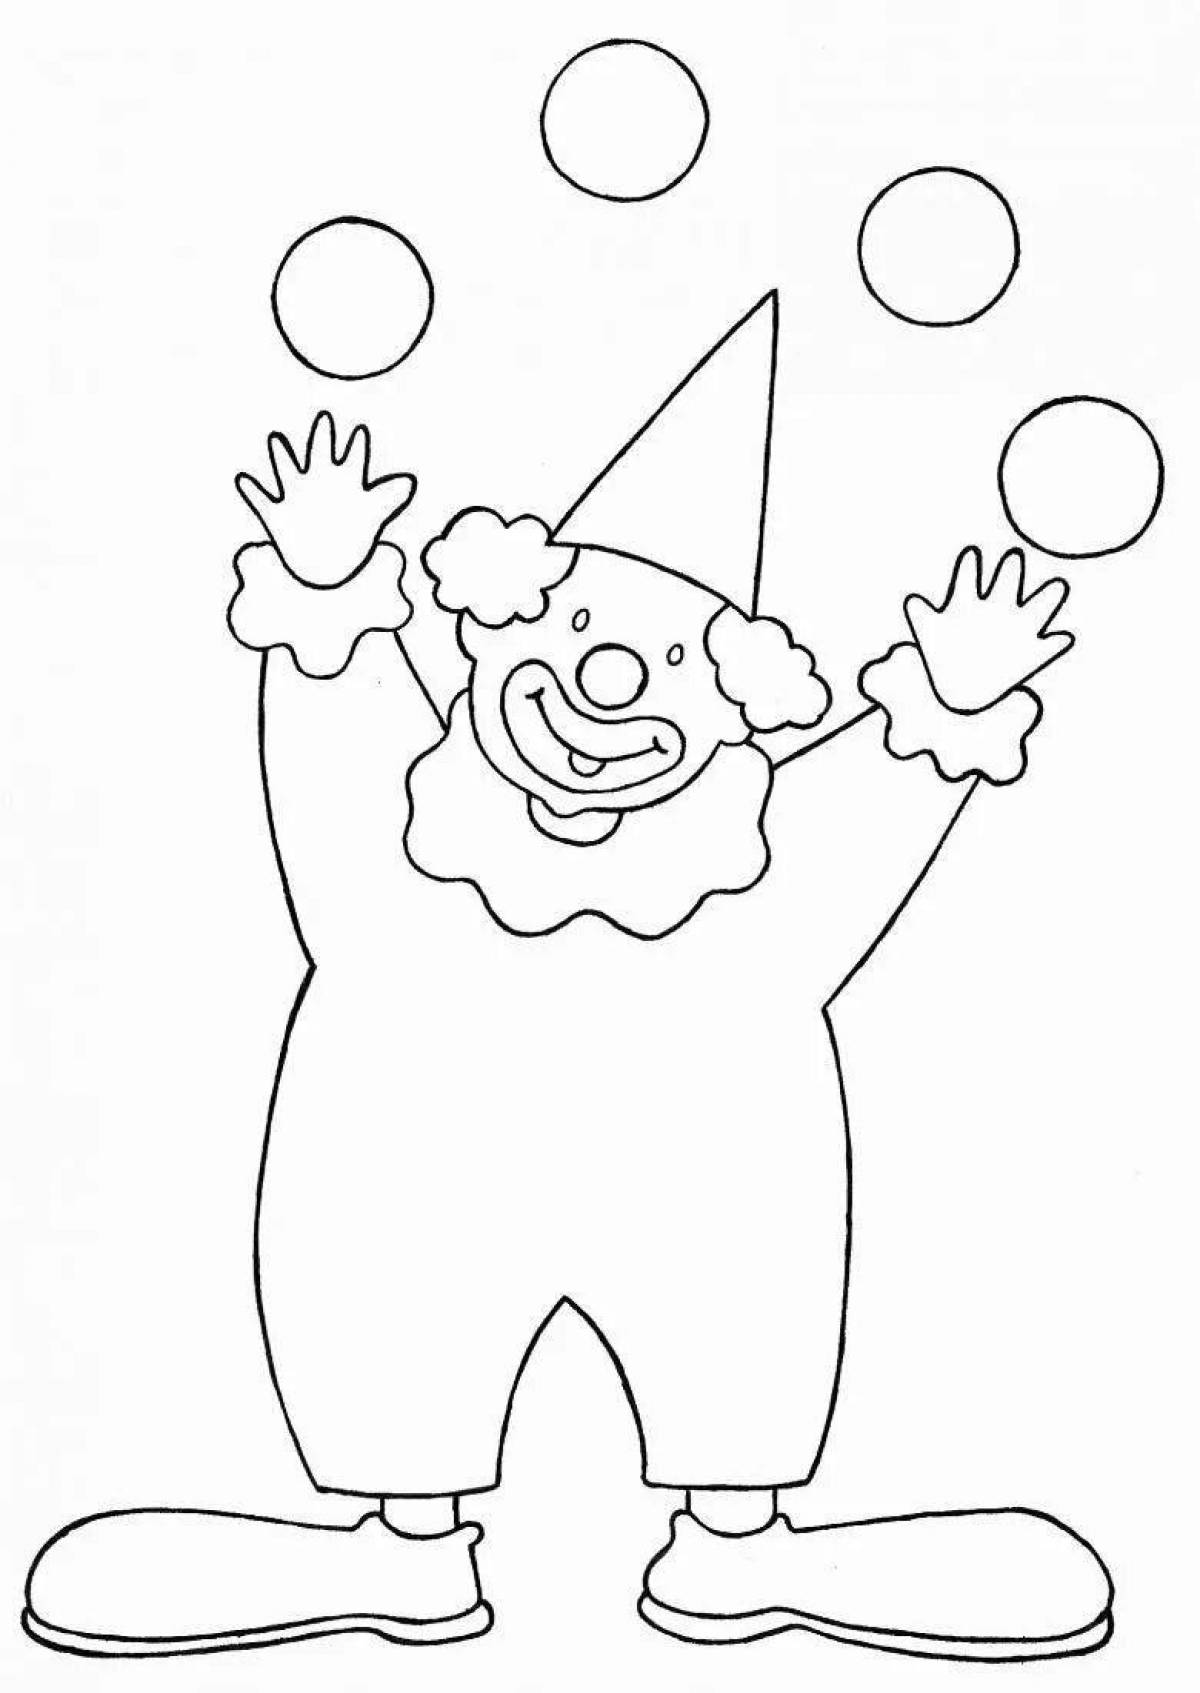 Outstanding parsley coloring page for kids